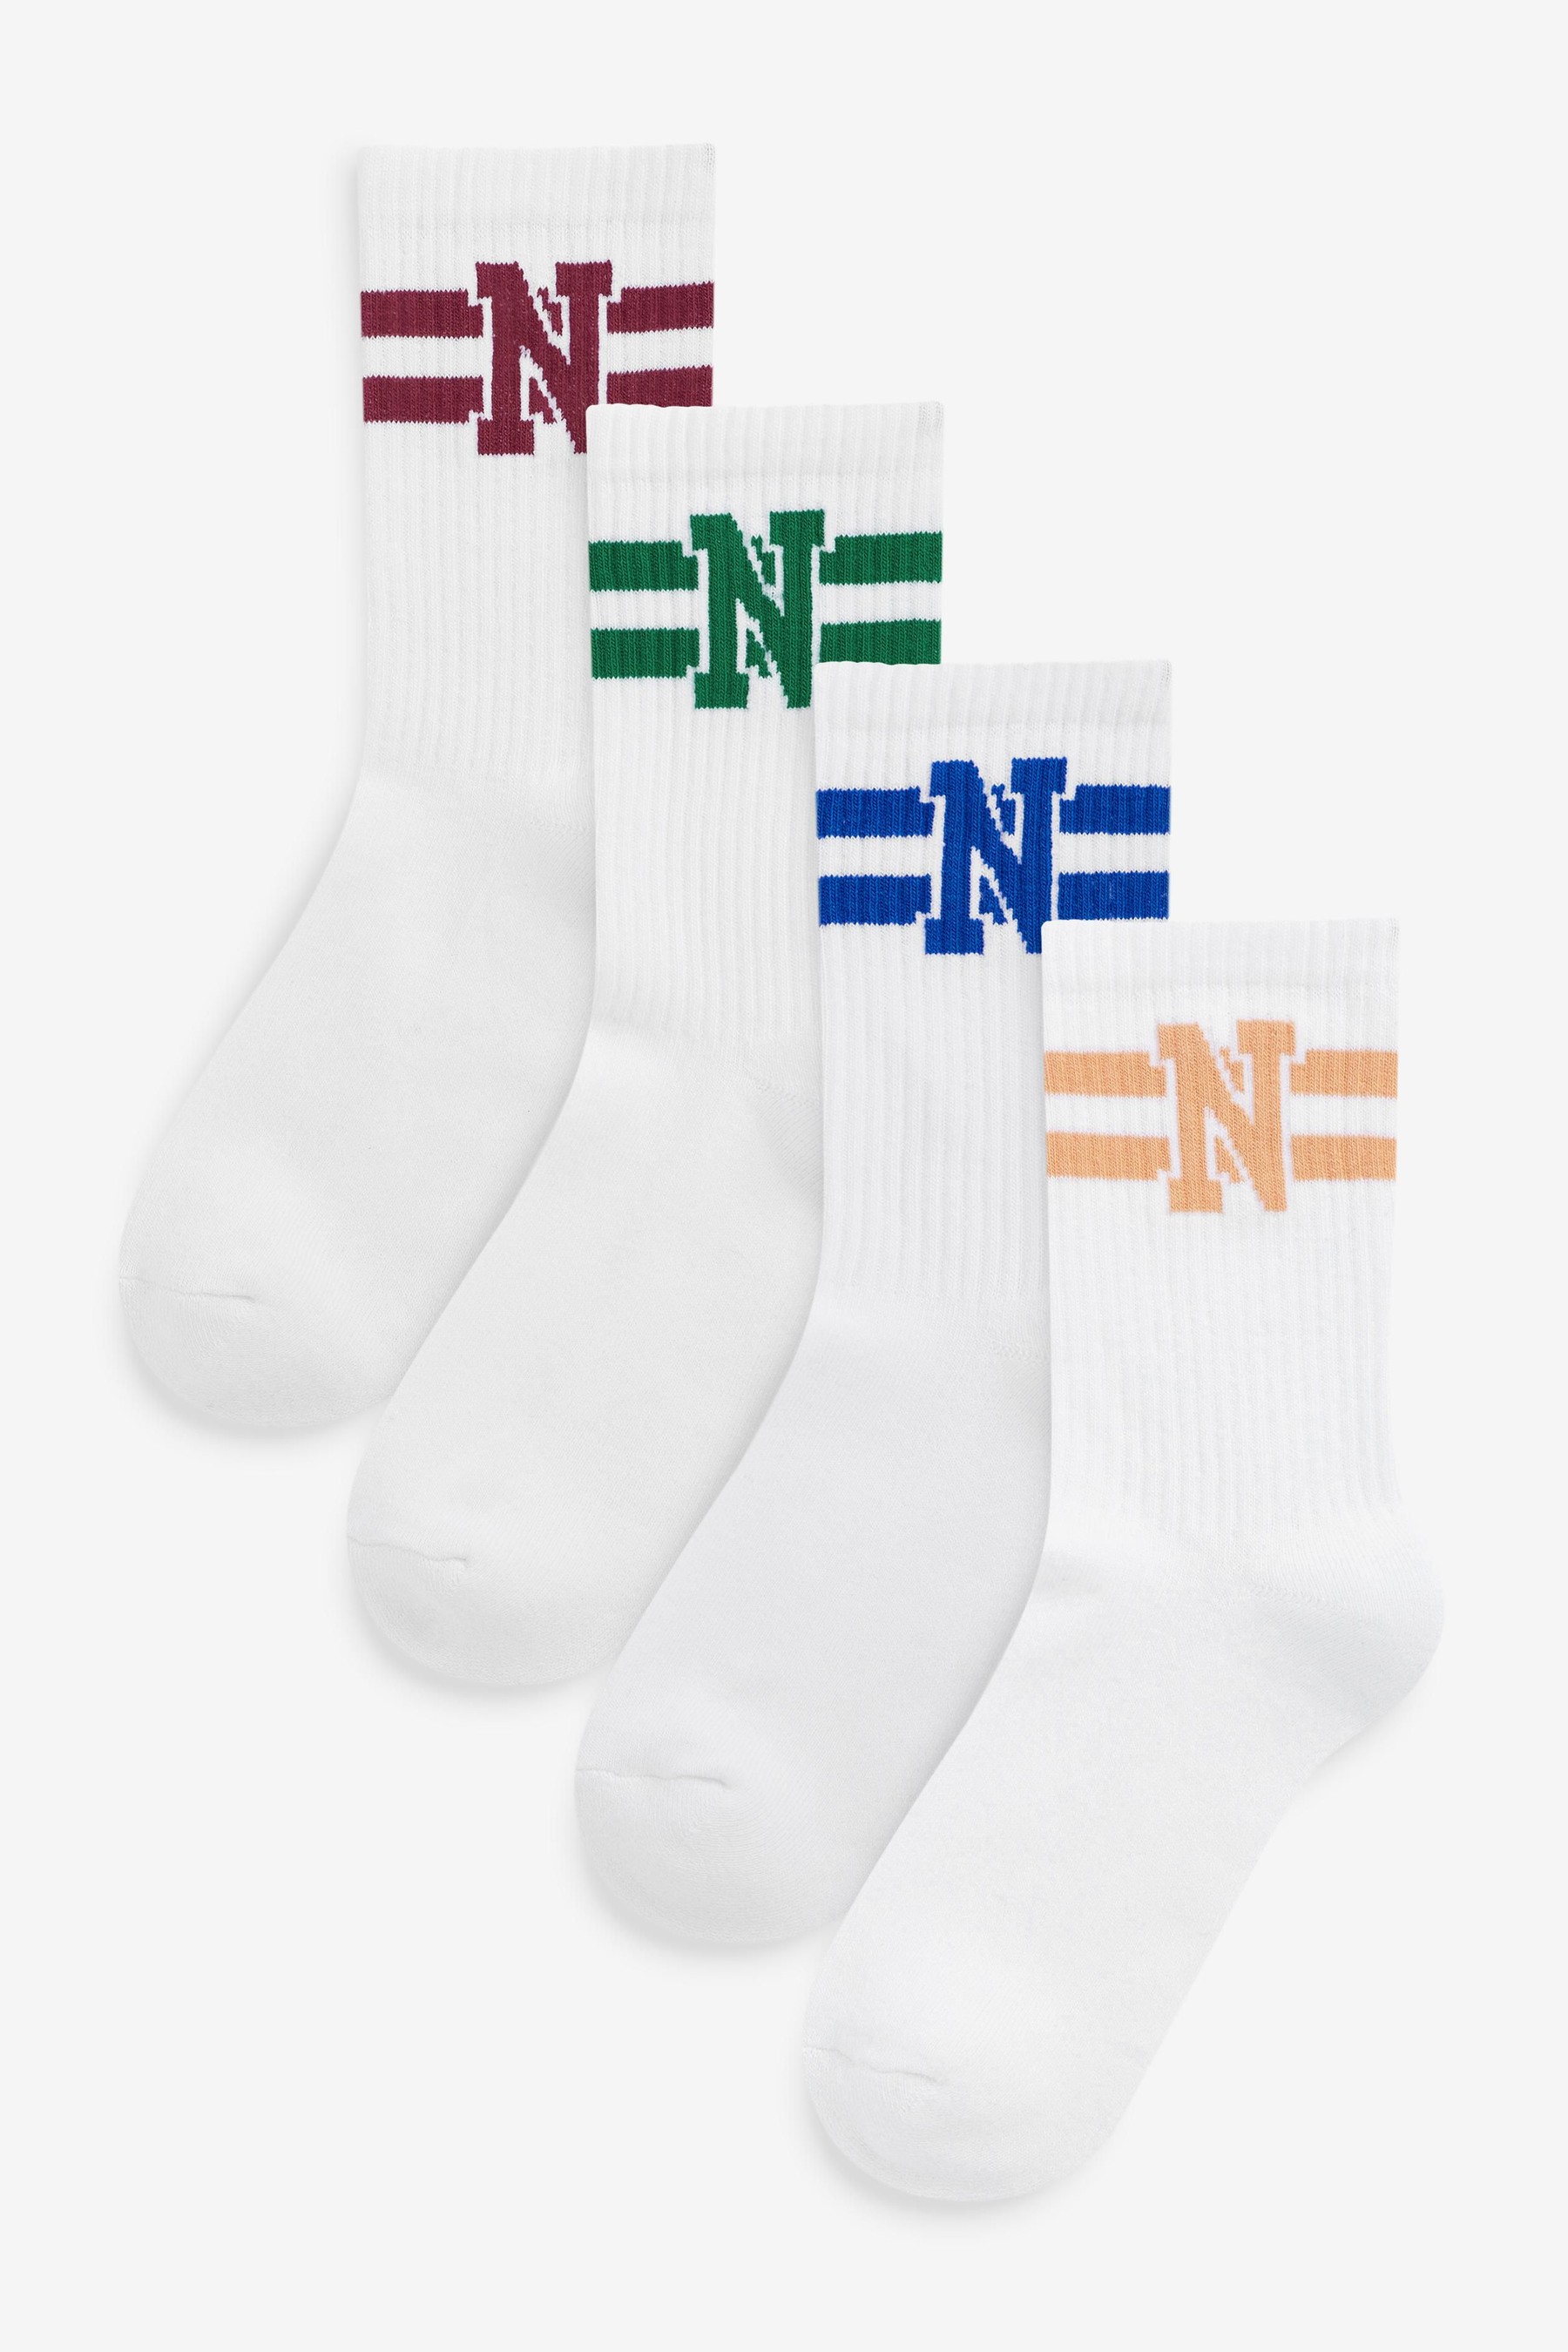 Next Sports Collegiate Style Cushion Sole Ankle Socks 4 Pack